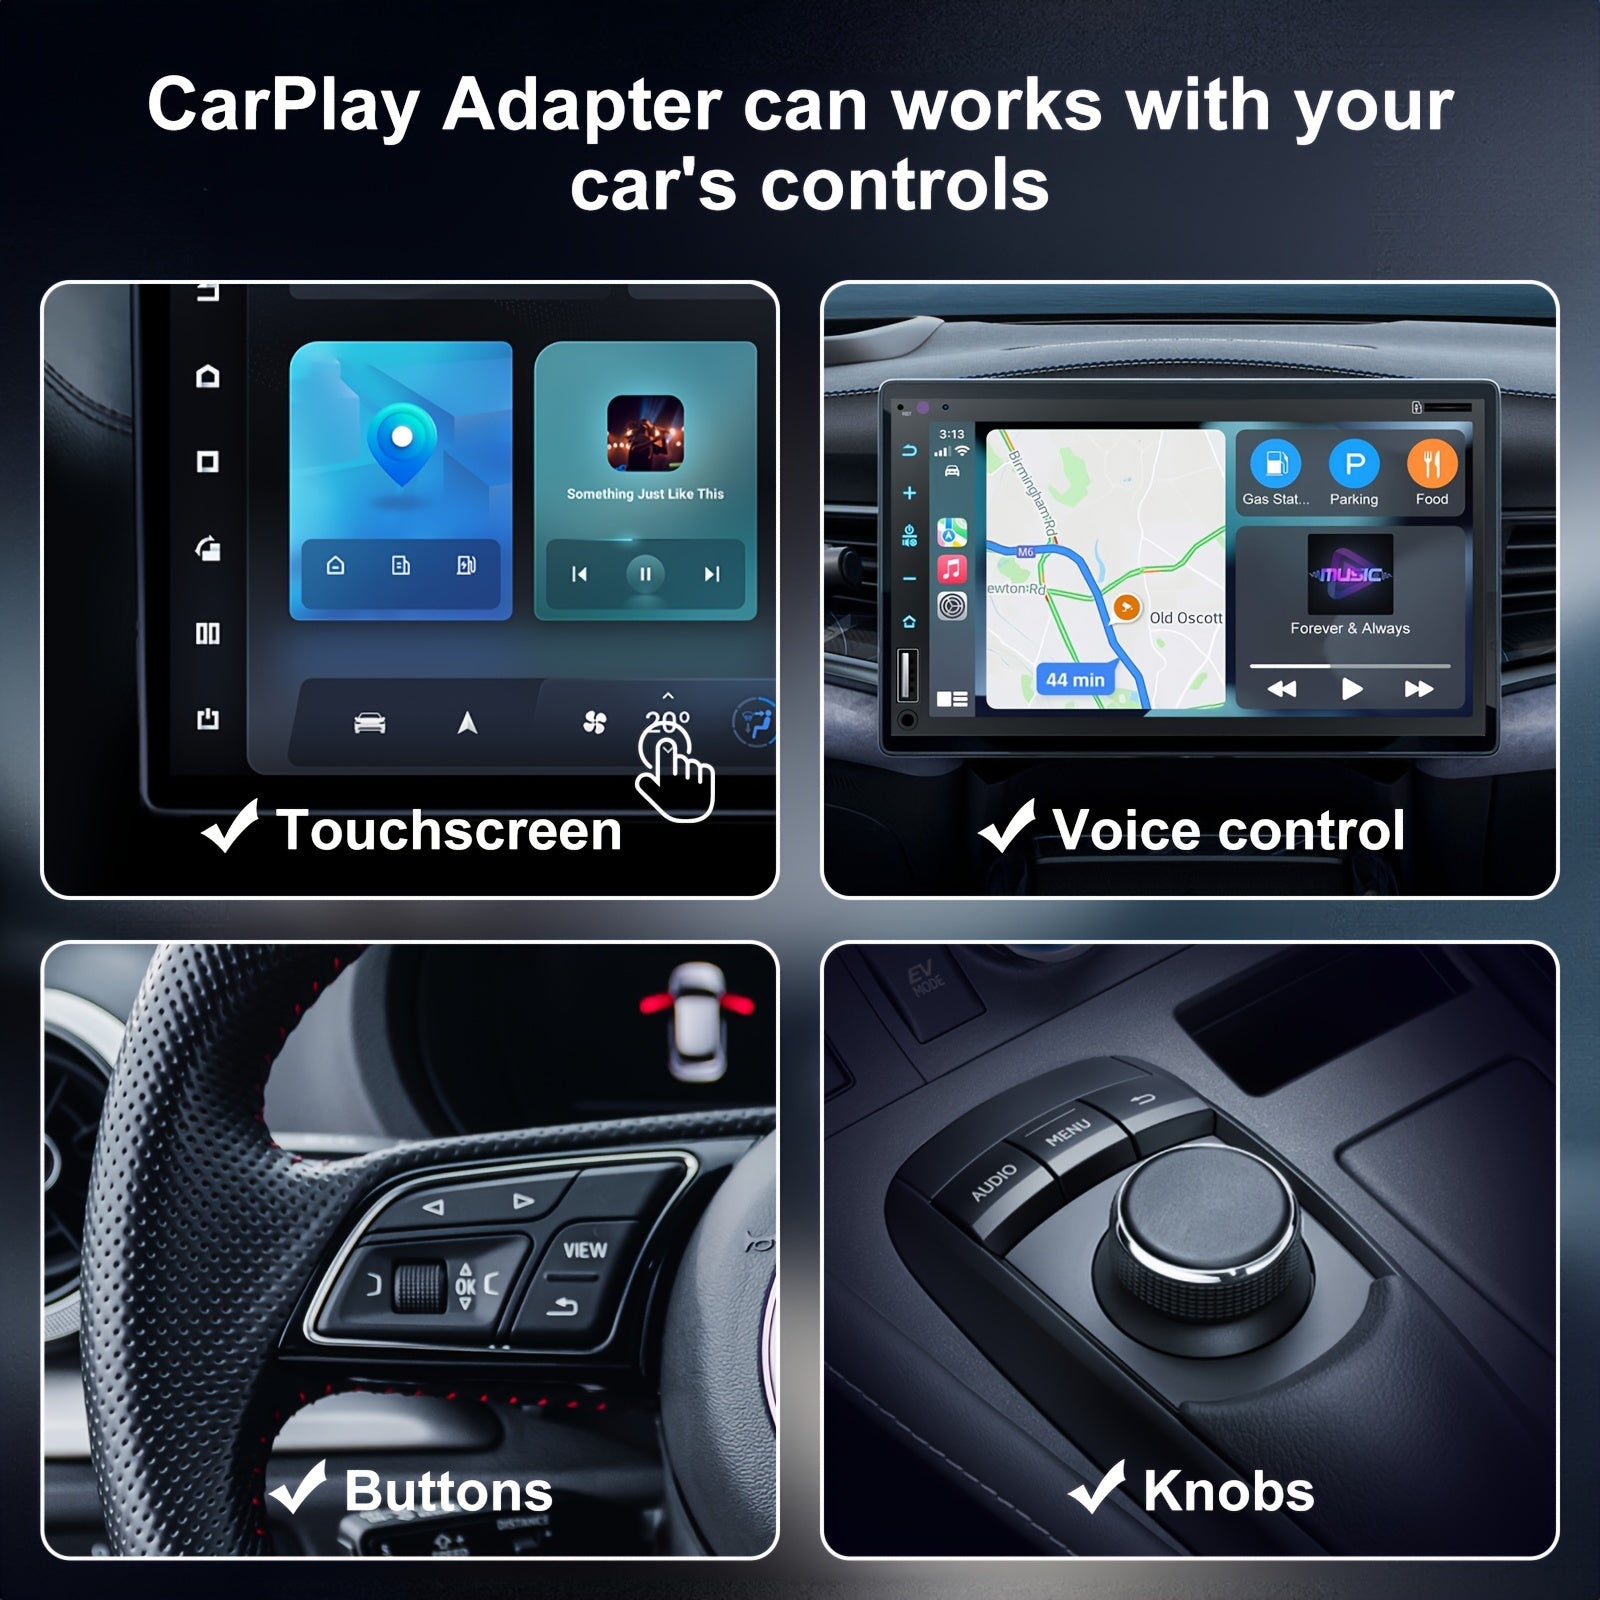 Wireless CarPlay - Wired CarPlay Convert Cars Wireless CarPlay，Wireless  CarPlay Adapter，Apple CarPlay Wireless Adapter，Wireless Fast and Easy Use  Fit for Cars f…